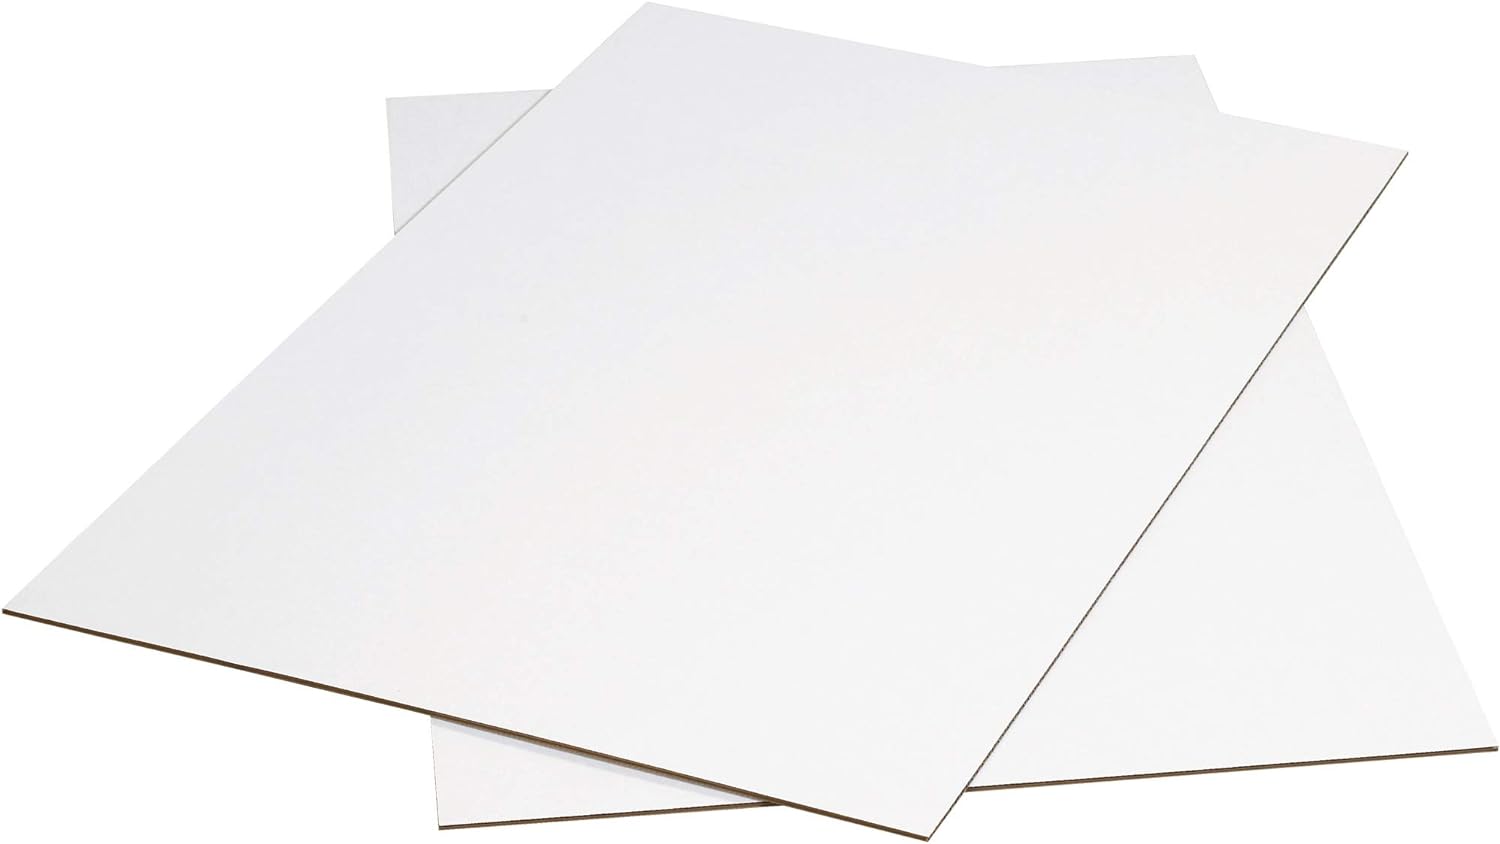  Premium Corrugated Cardboard Sheets 24 X 36 - 30 per Bundle  - Flat Packaging Pads - Kraft Double Face - Quantity 30 Pack - For Packing,  Mailing, Inserts or Krafts (24x36) : Office Products